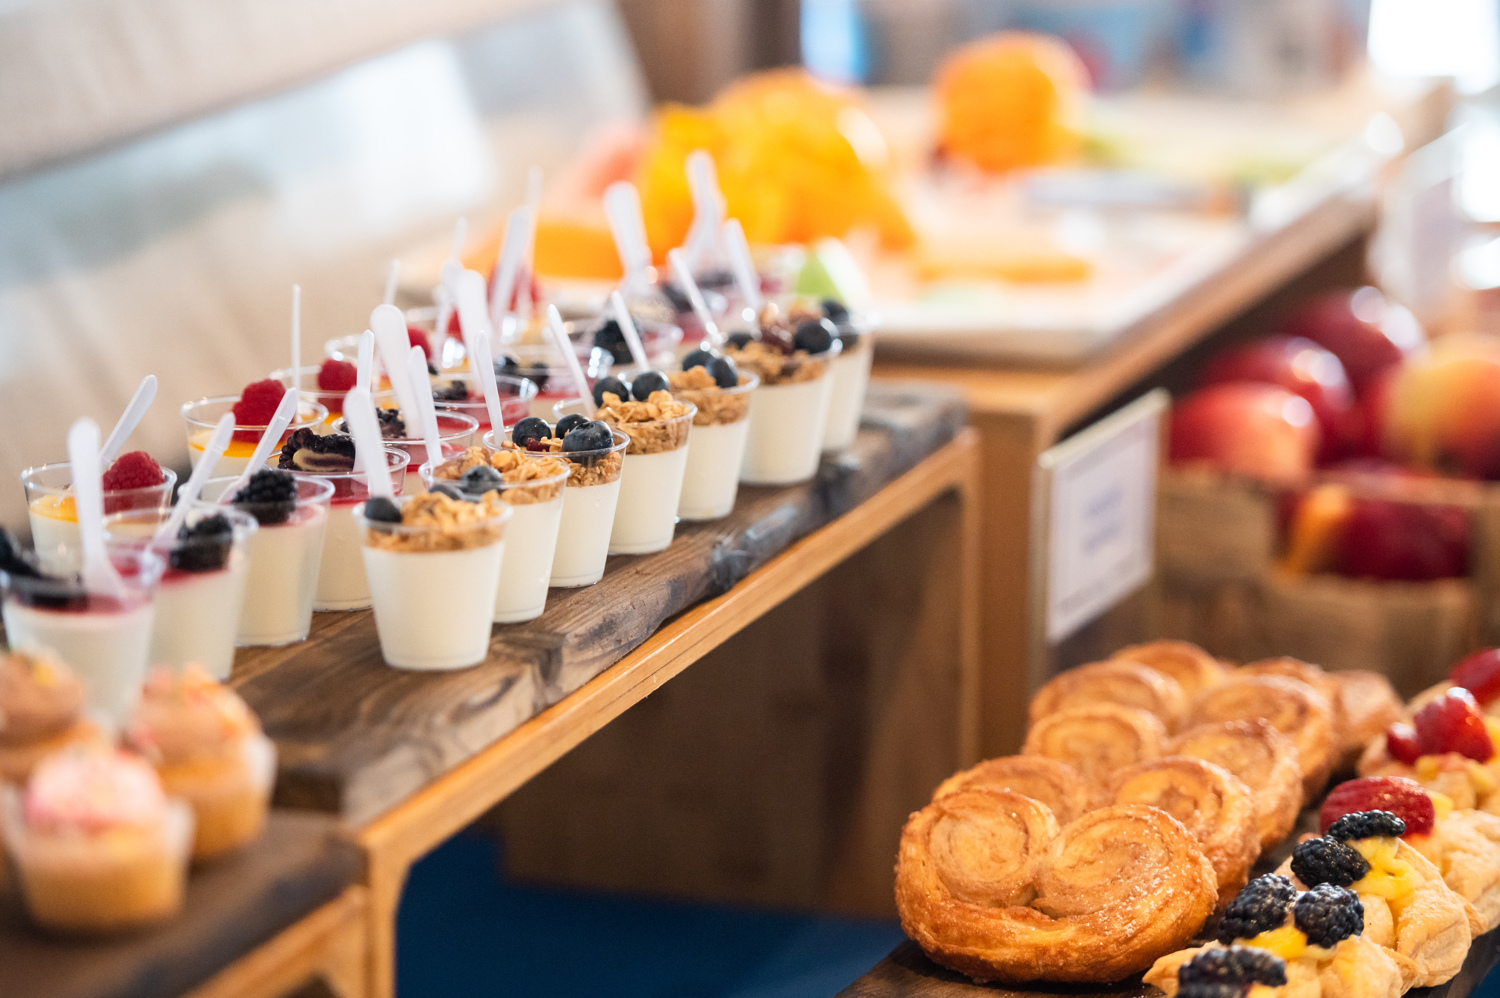 A buffet setup including parfaits and pastries